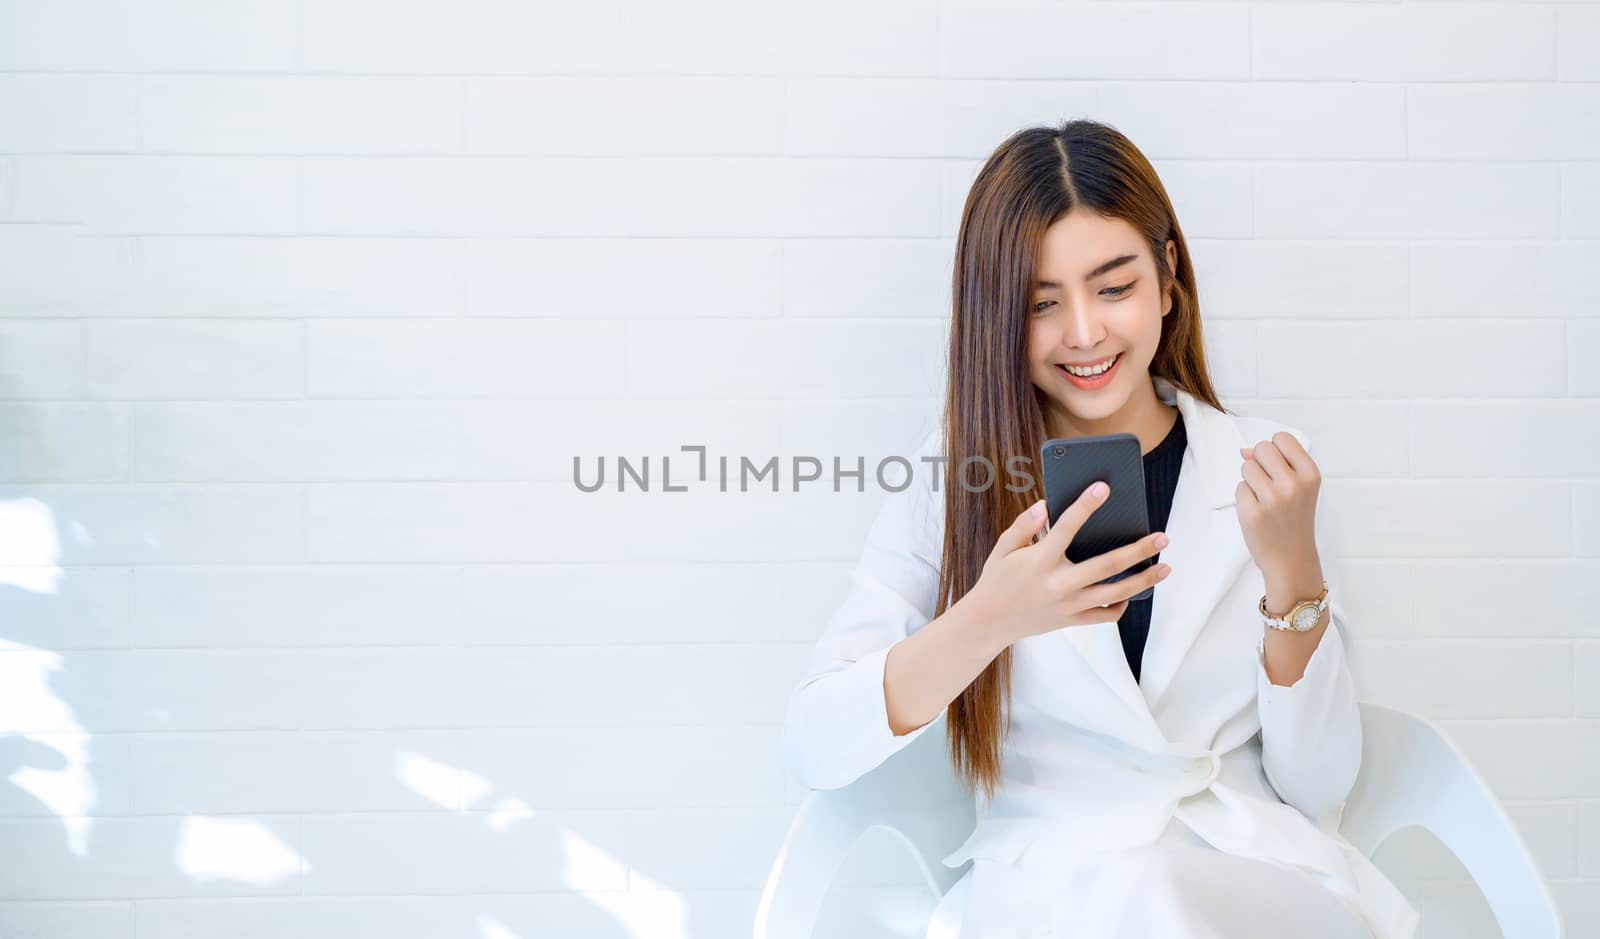 Business women wear white clothes glad to play mobile phone in a white background by sarayut_thaneerat